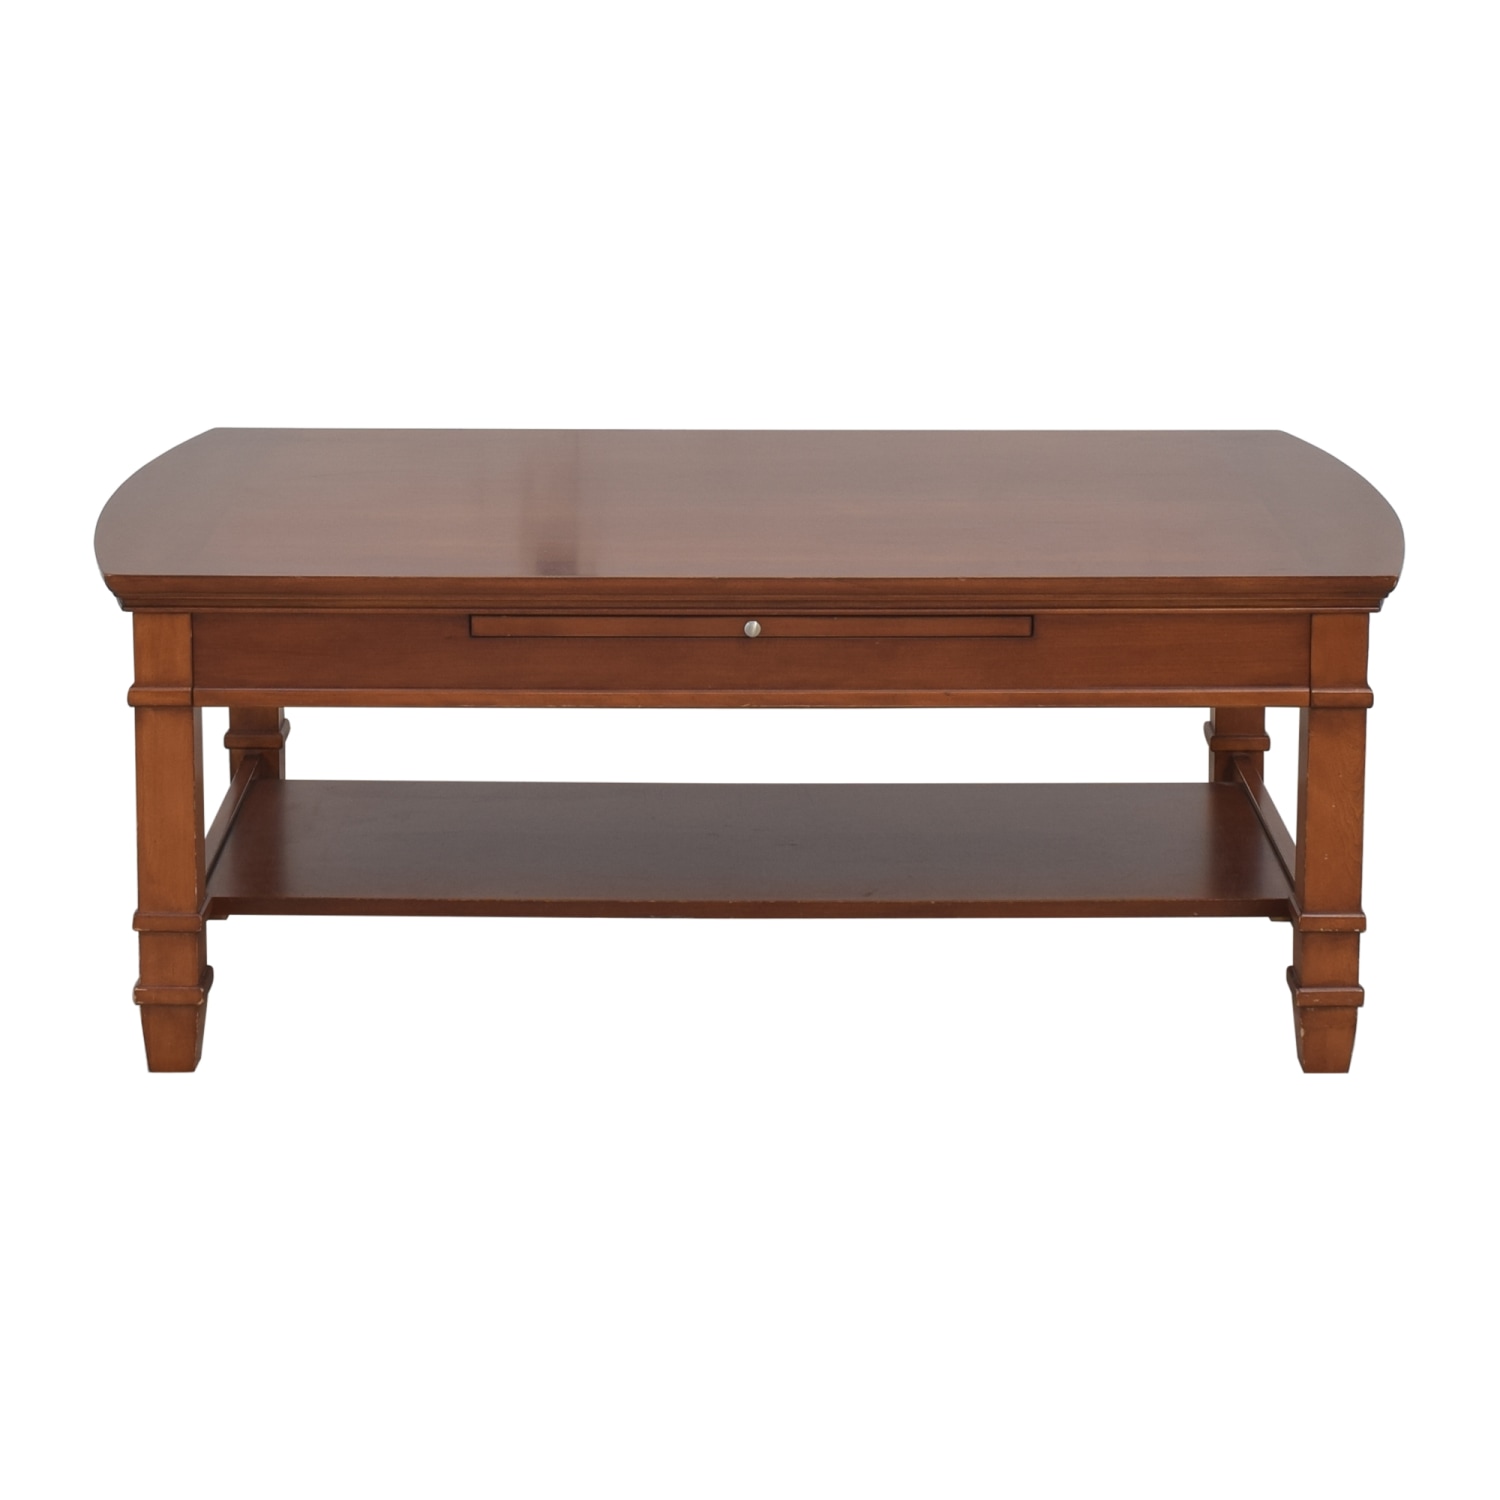 Thomasville Thomasville Bridges 2.0 Rectangular Coffee Table with Extension discount